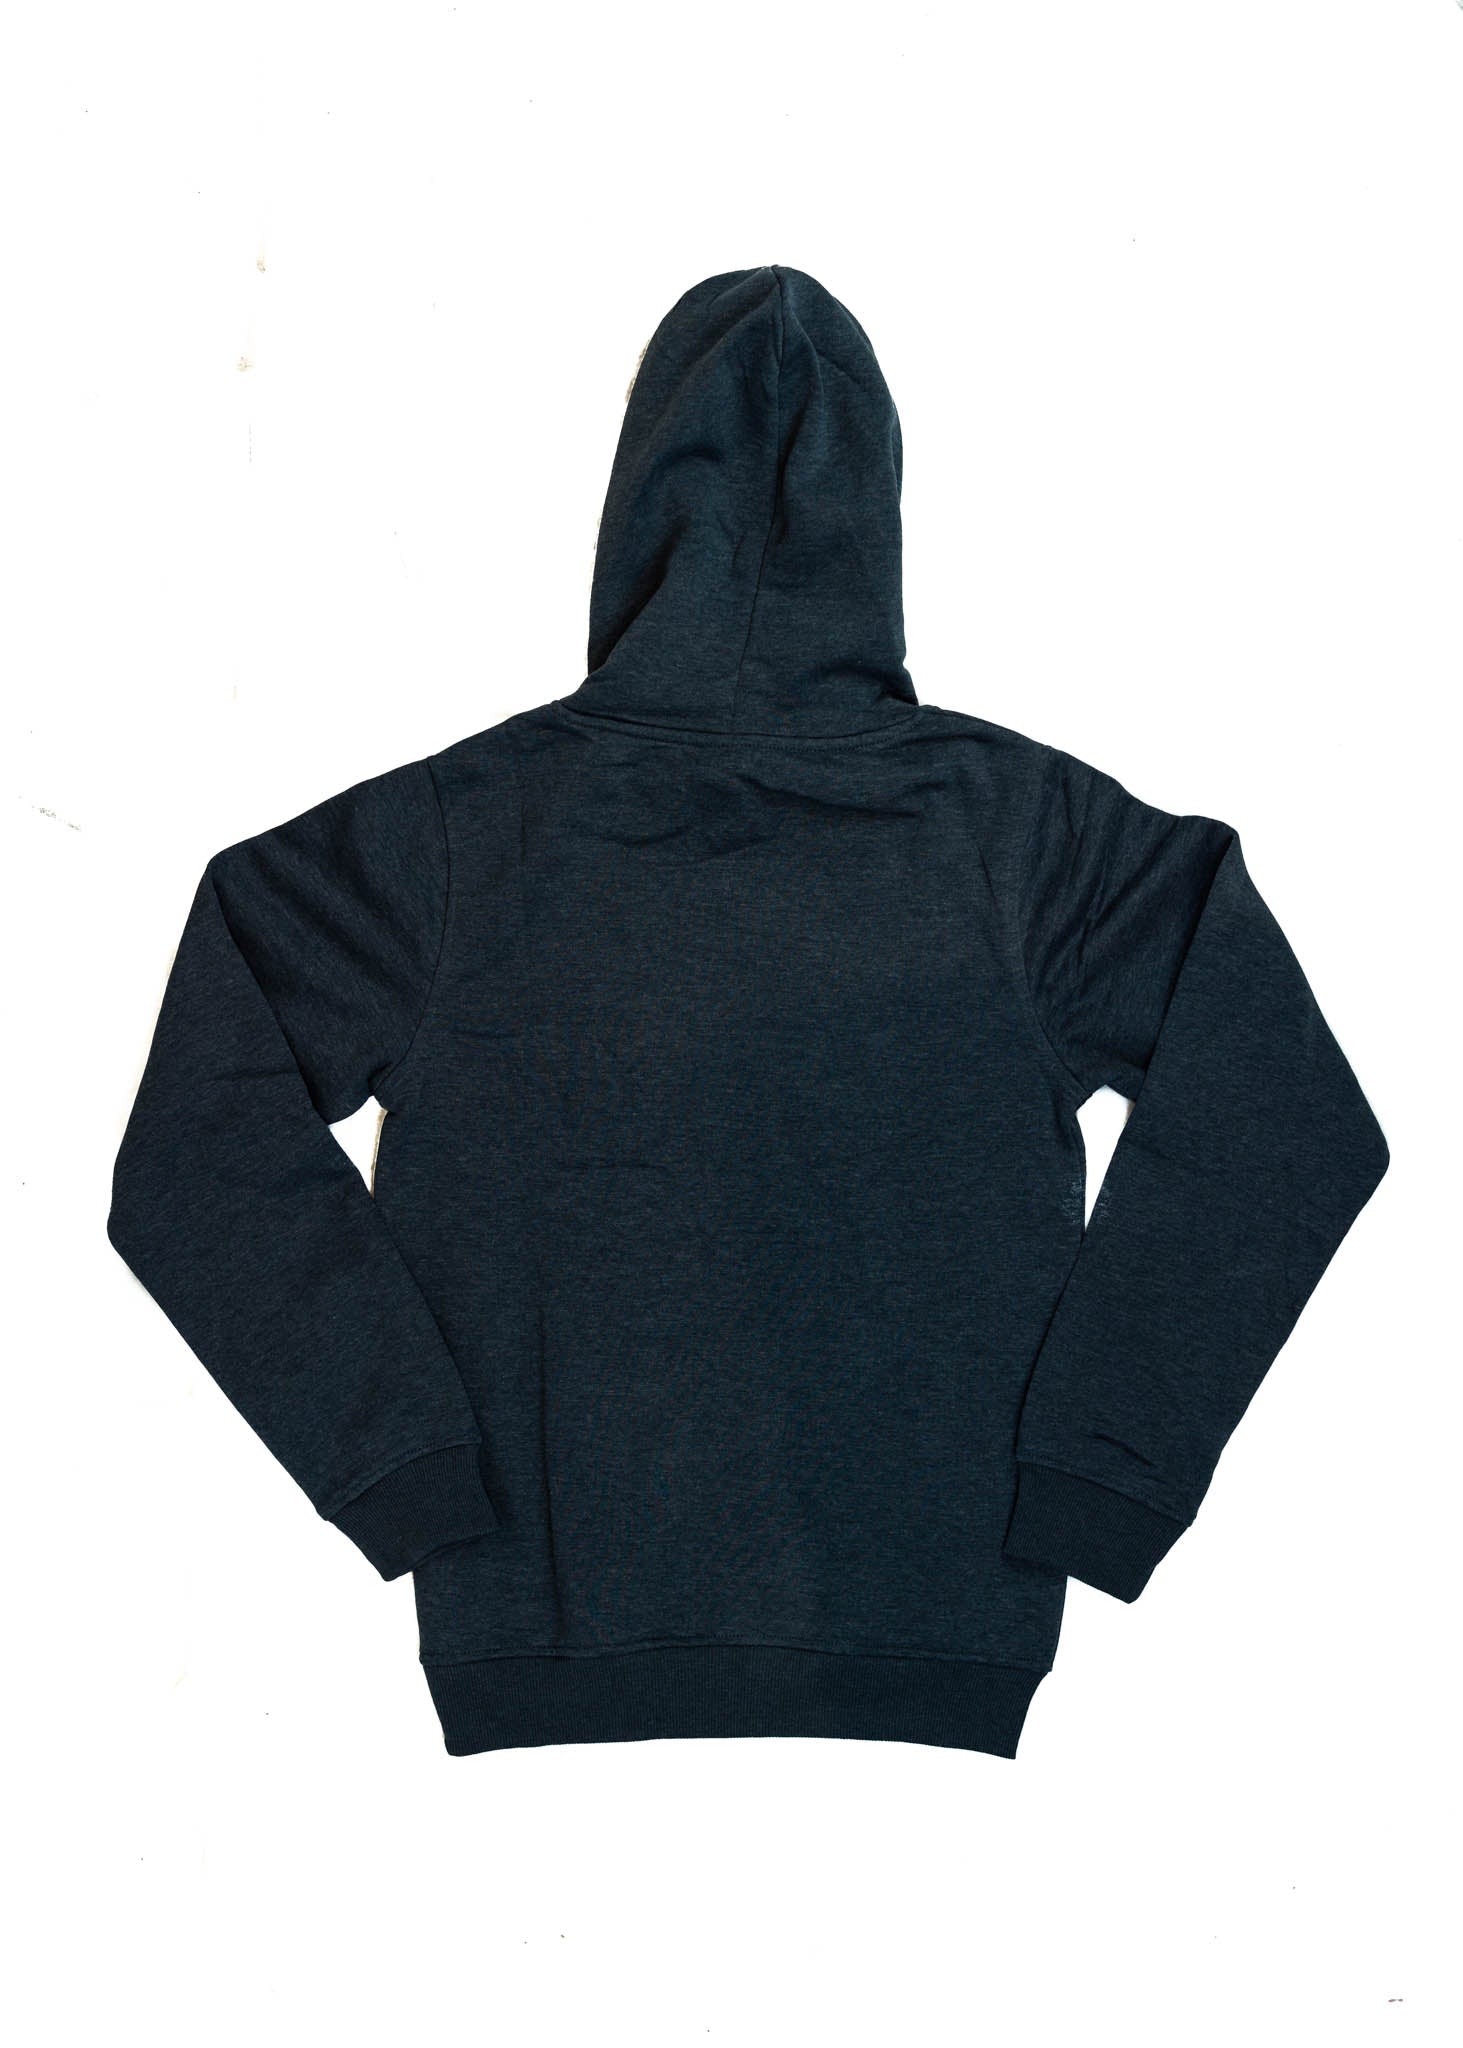 A dark blue BMW unisex hoodie for men and women. Photo is a back view of the sweater with an embroidered BMW 2002 Turbo. Fabric composition is cotton, polyester, and rayon. The material is very soft, stretchy, and non-transparent. The style of this hoodie is long sleeve, crewneck with a hood, hooded, with embroidery on the left chest.